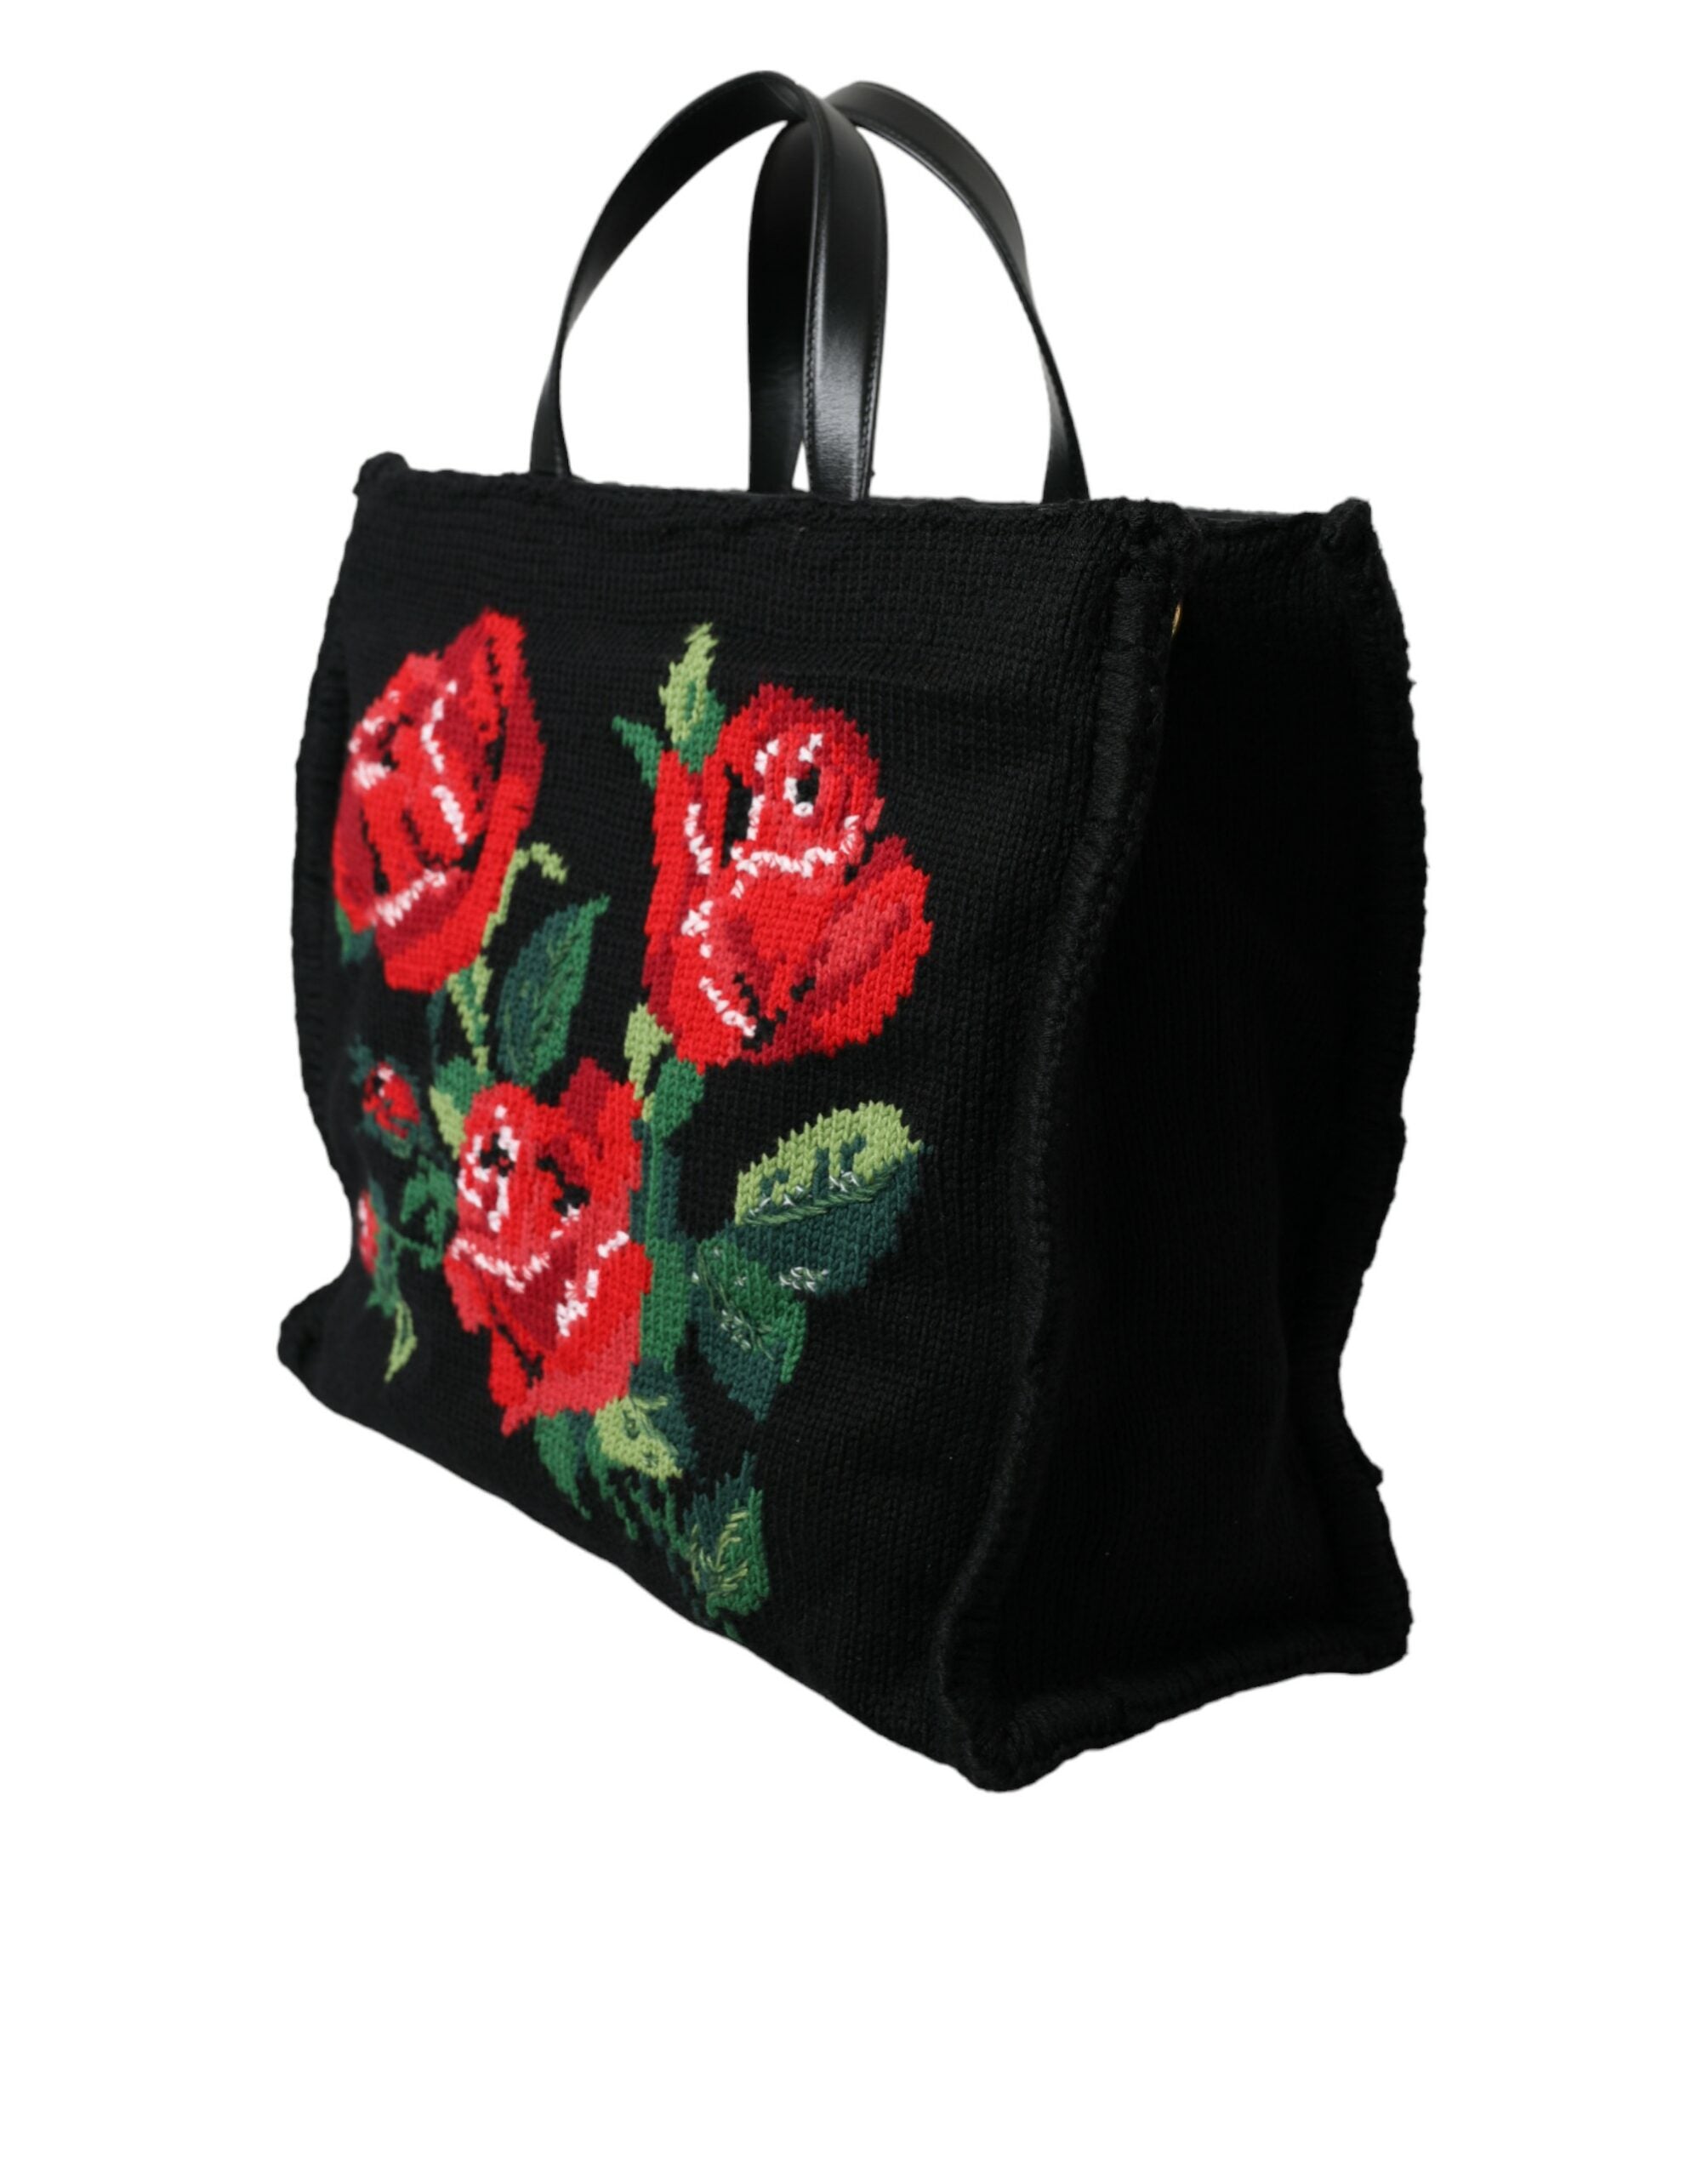 Dolce & Gabbana Chic Embroidered Floral Black Tote